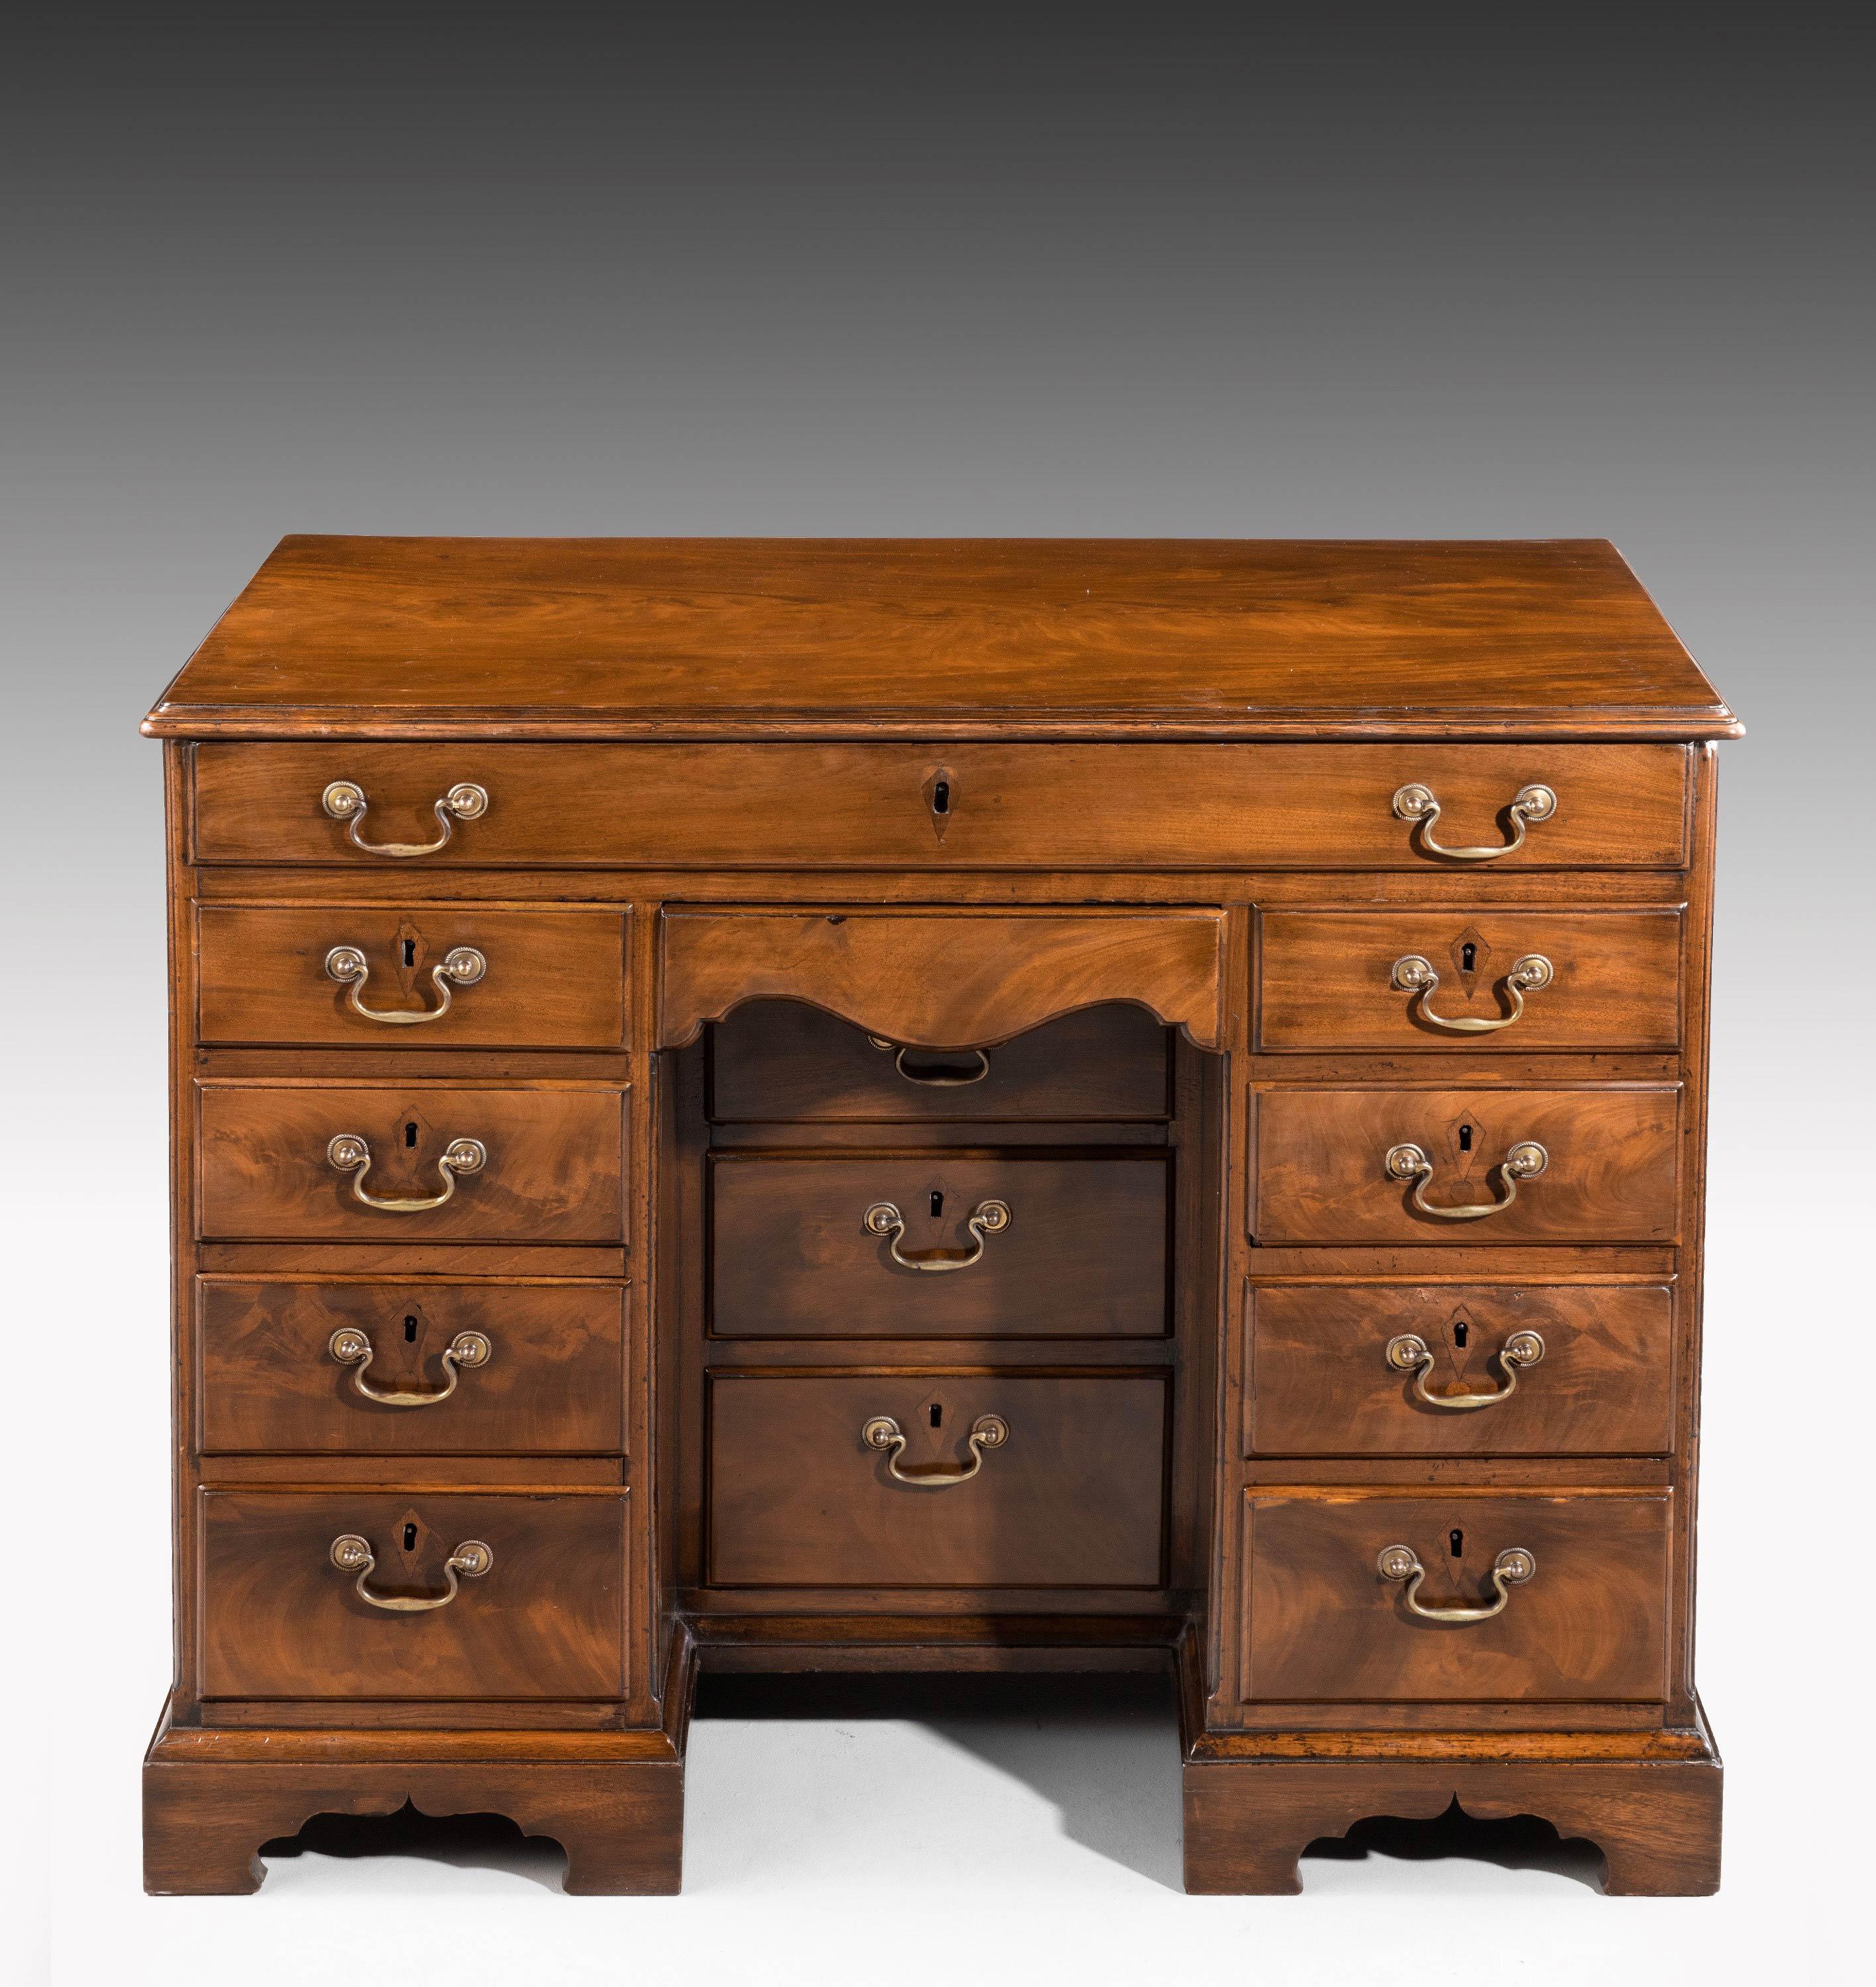 Mahogany Chippendale Period Kneehole Desk or Dressing Table